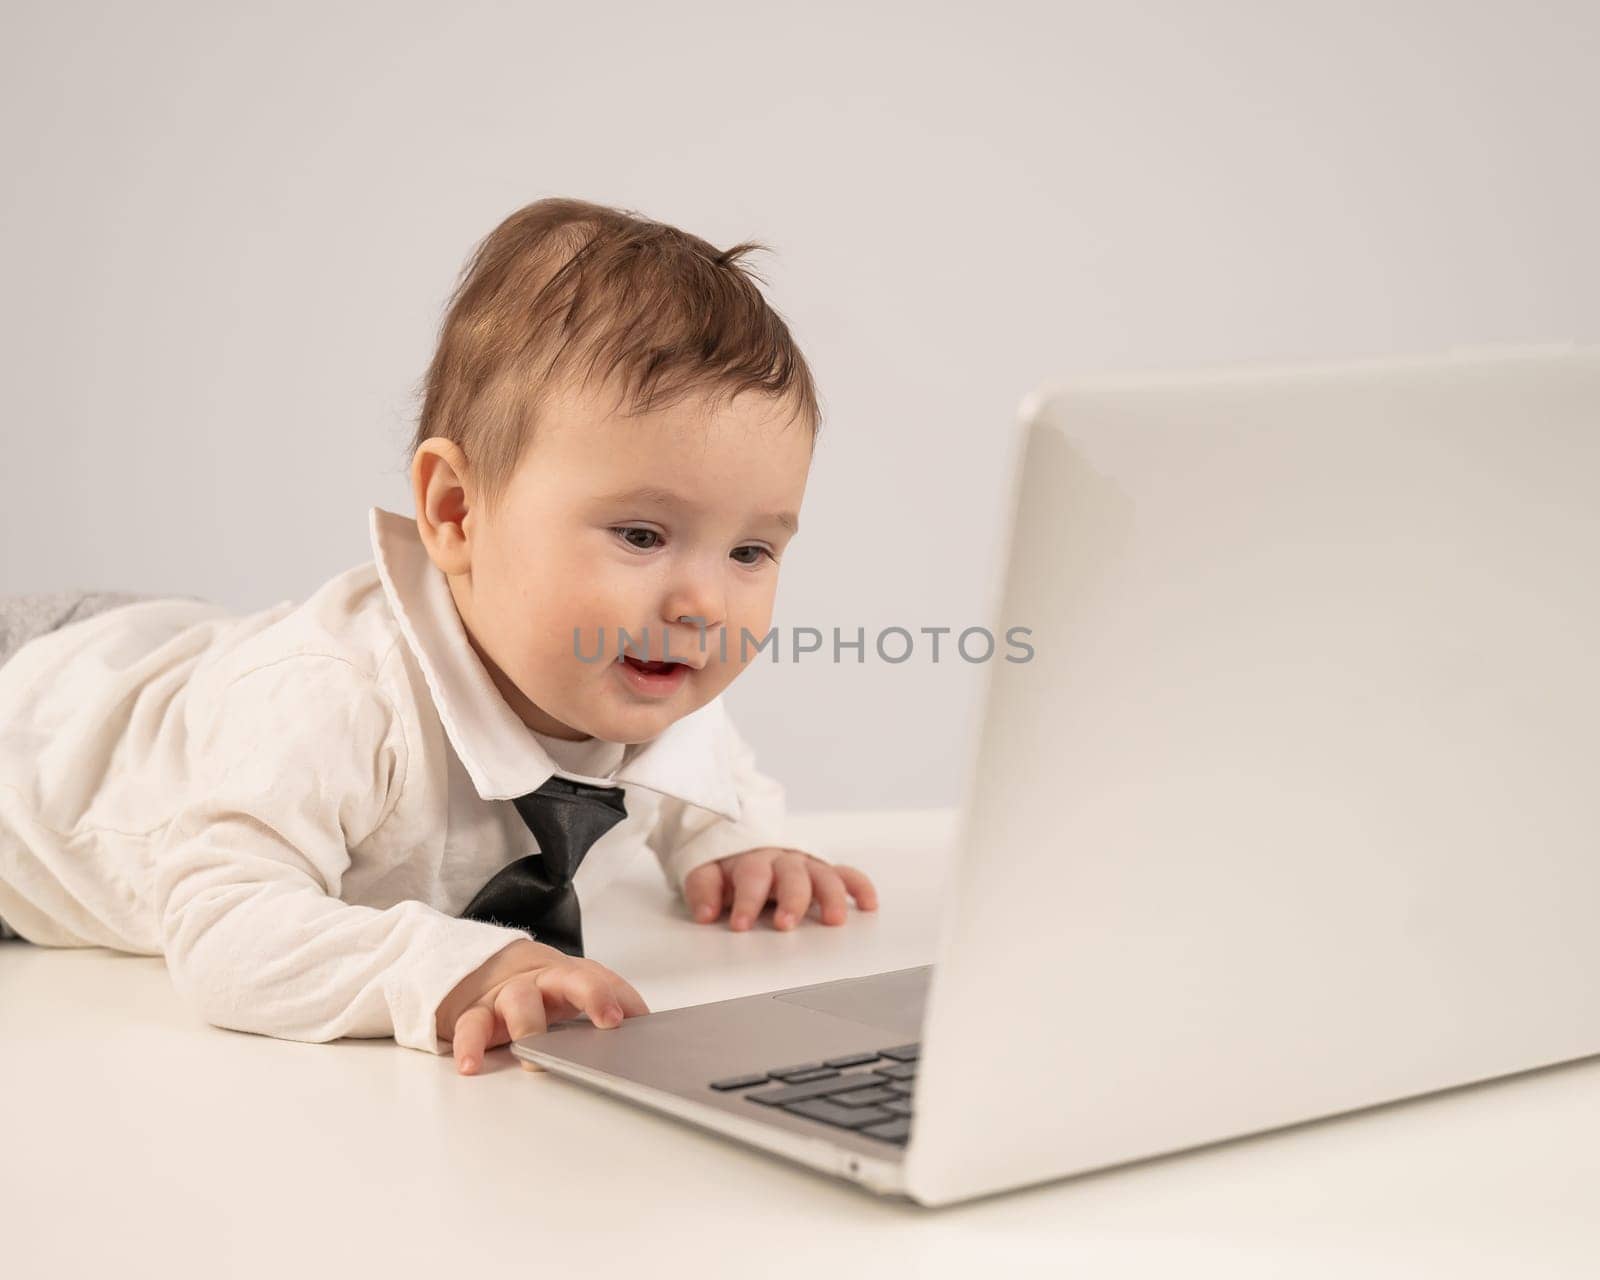 Cute baby boy in a tie working at a laptop